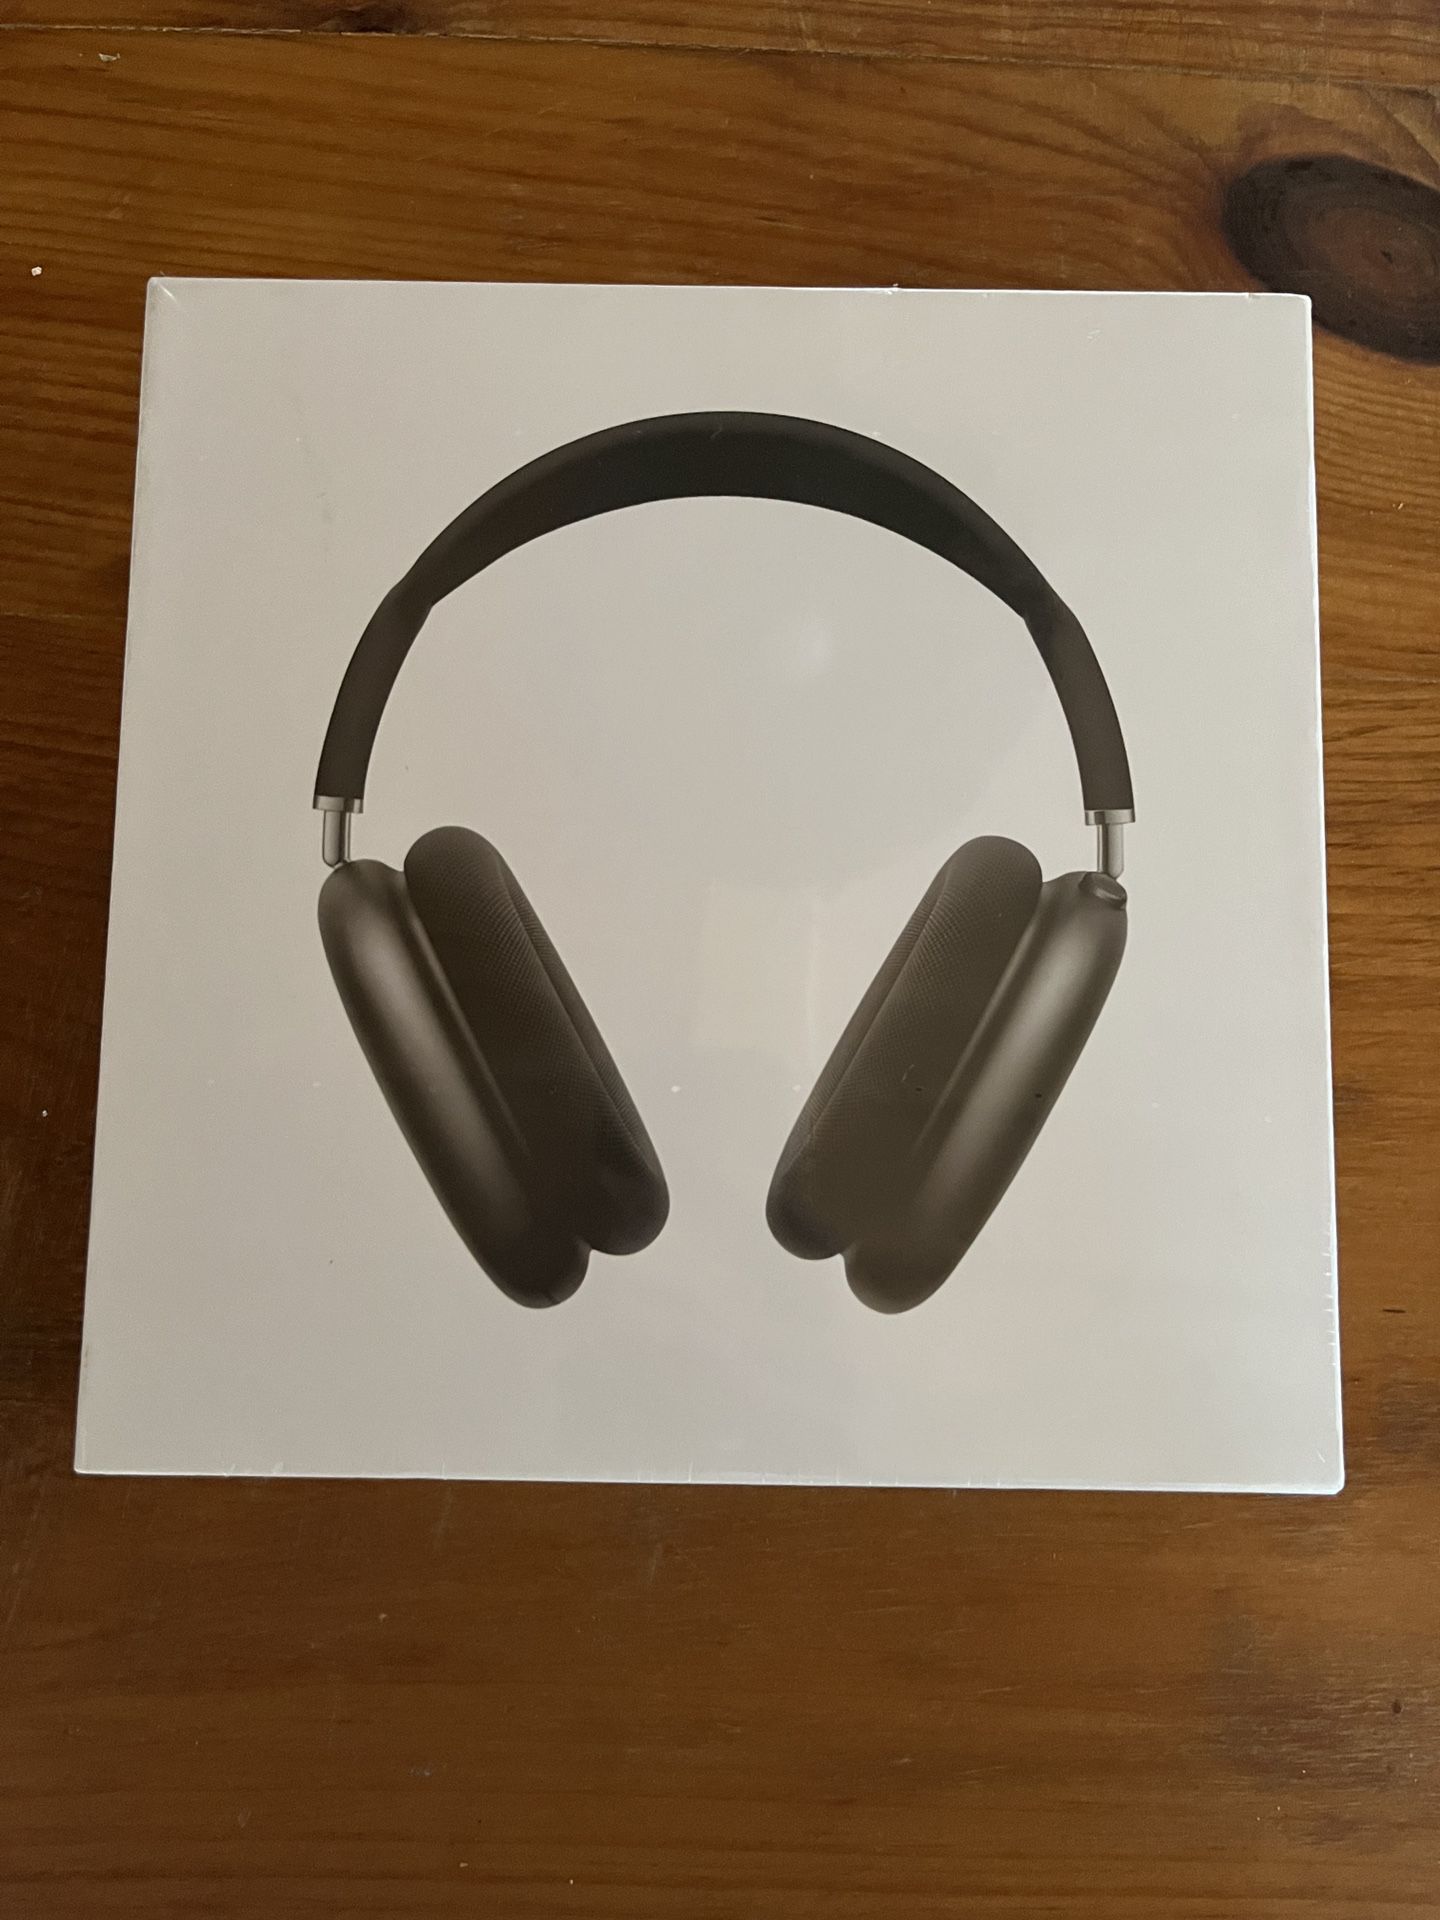 “Best Offer” Airpod Max Space Grey